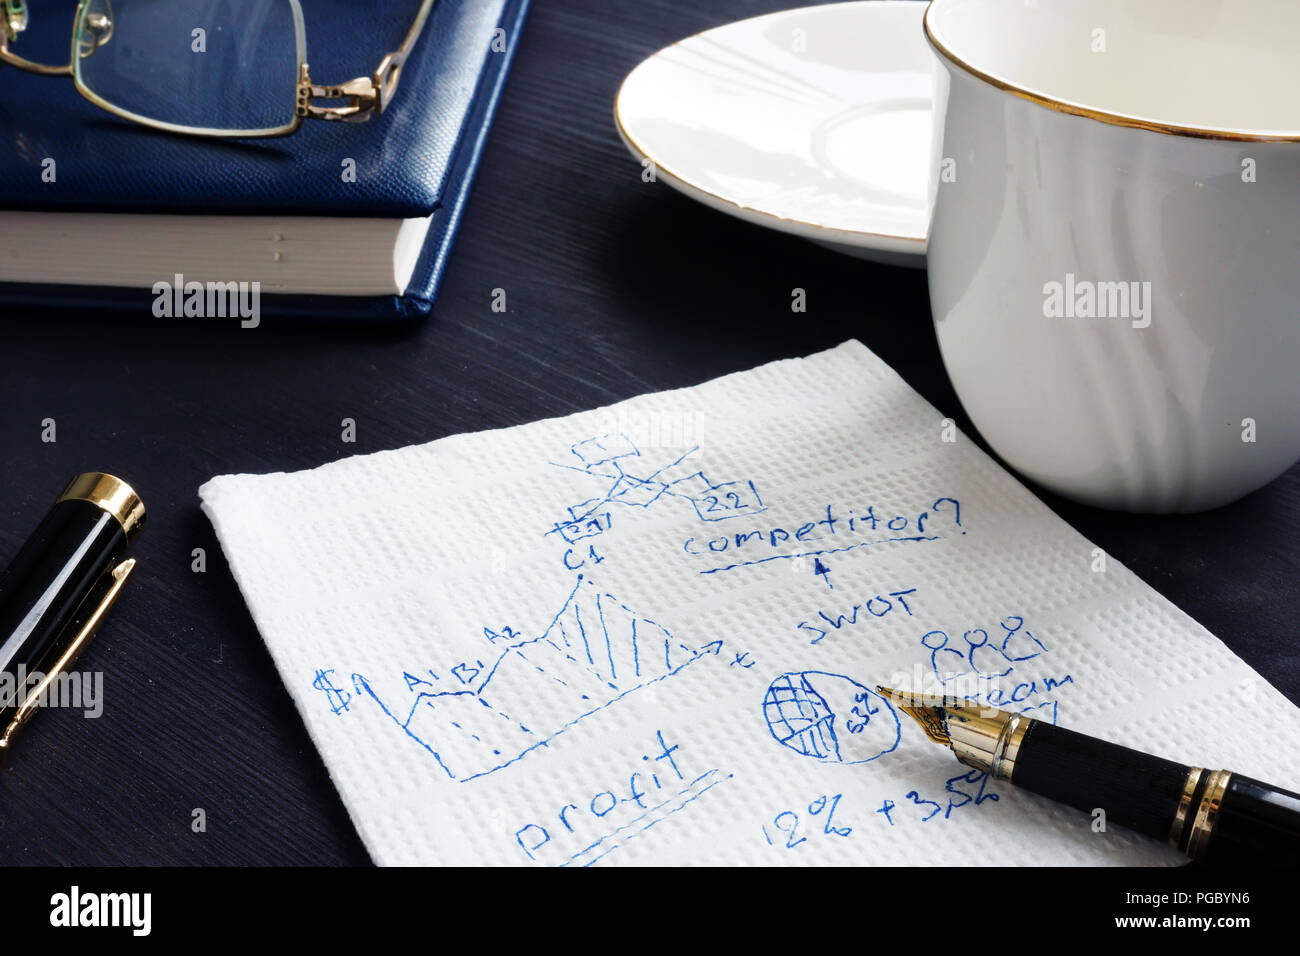 Business calculation and creative ideas written on a napkin. Stock Photo